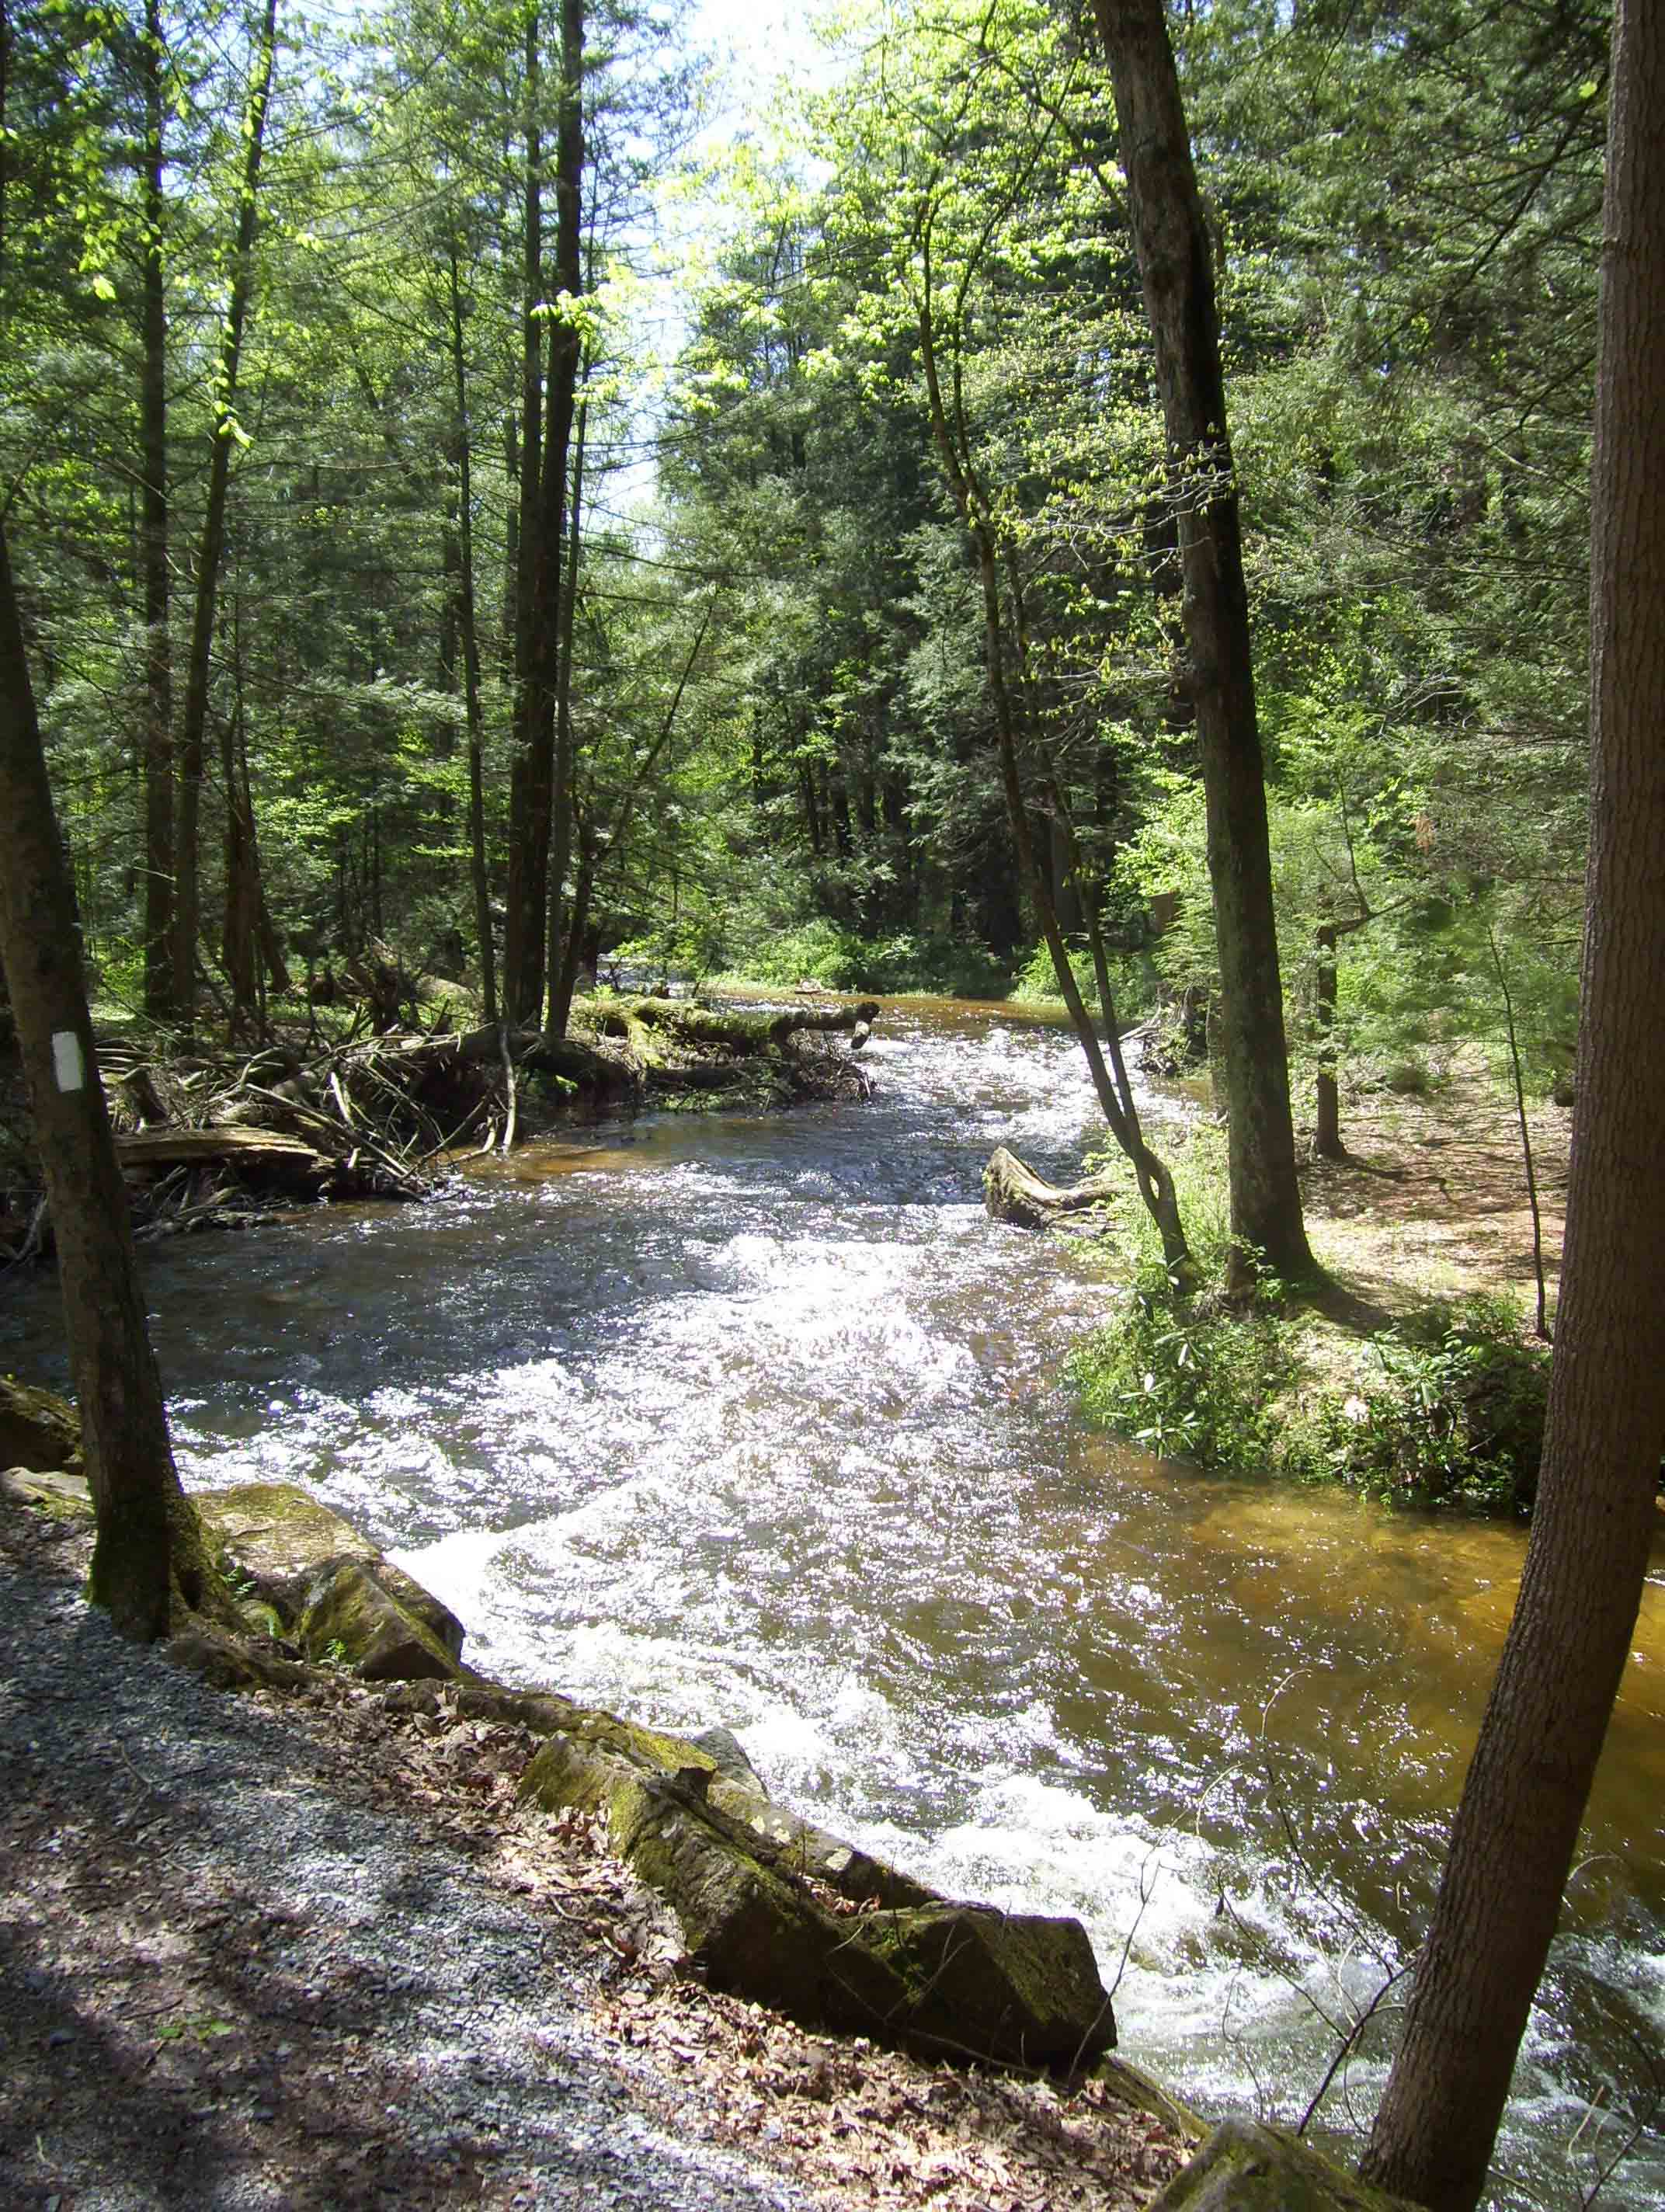 For much of the distance through Pine Grove Furnace State park, the trail parallels Mountain Creek. Taken at approx. mm 9.7.  Courtesy dlcul@conncoll.edu